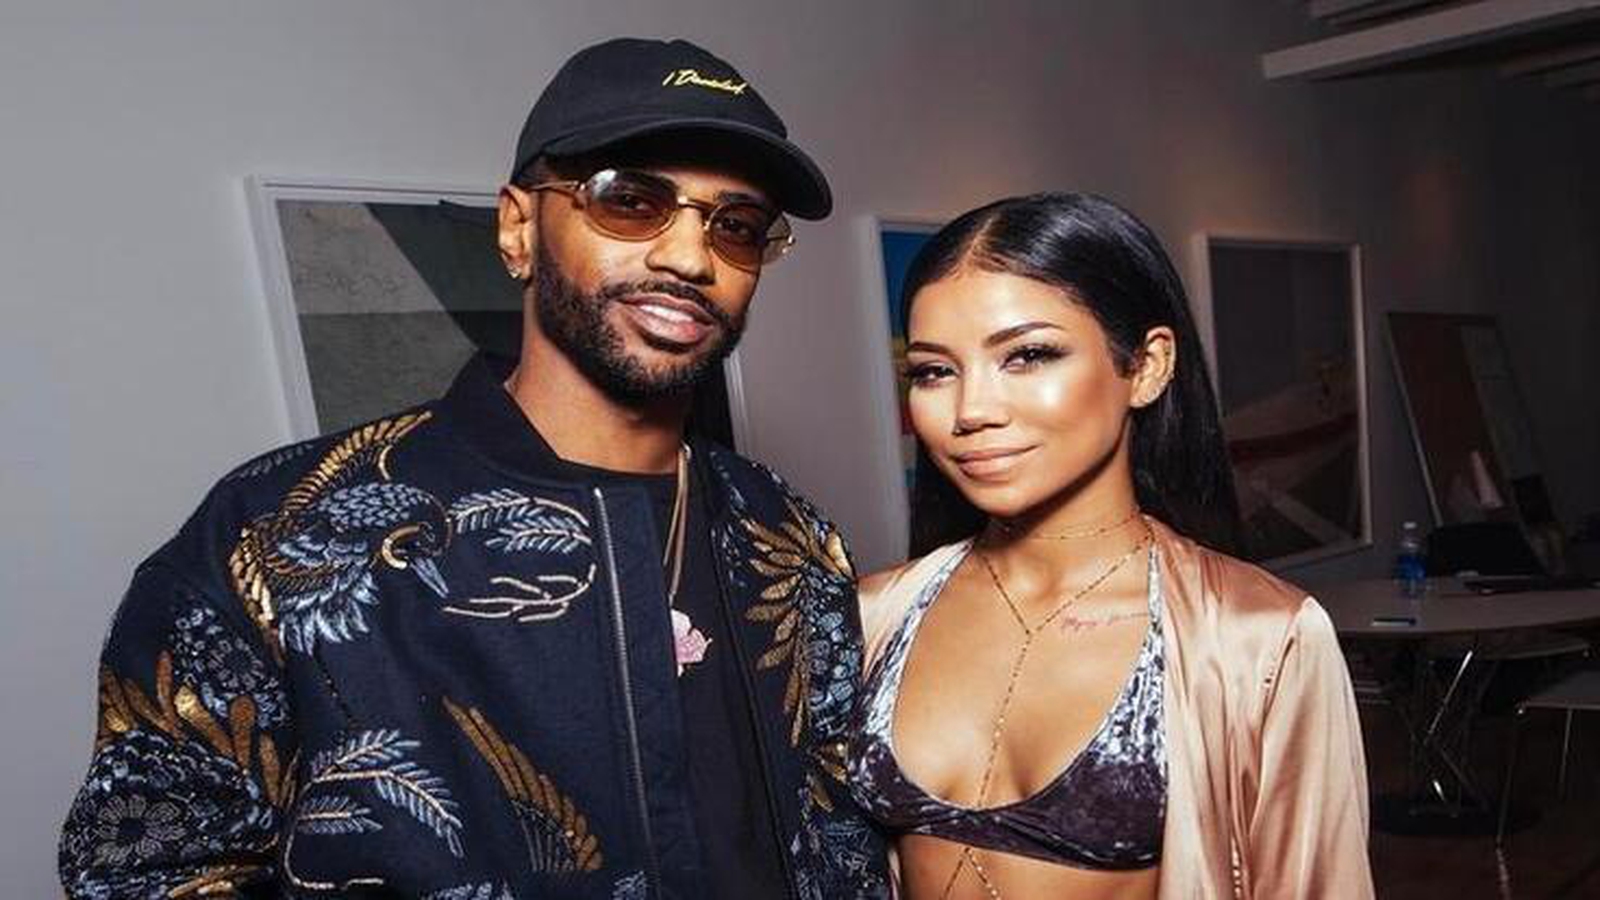 Jhene Aiko Tattoos Big Seans FACE on Her Arm to Celebrate Divorce From Dot  Da Genius  YouTube